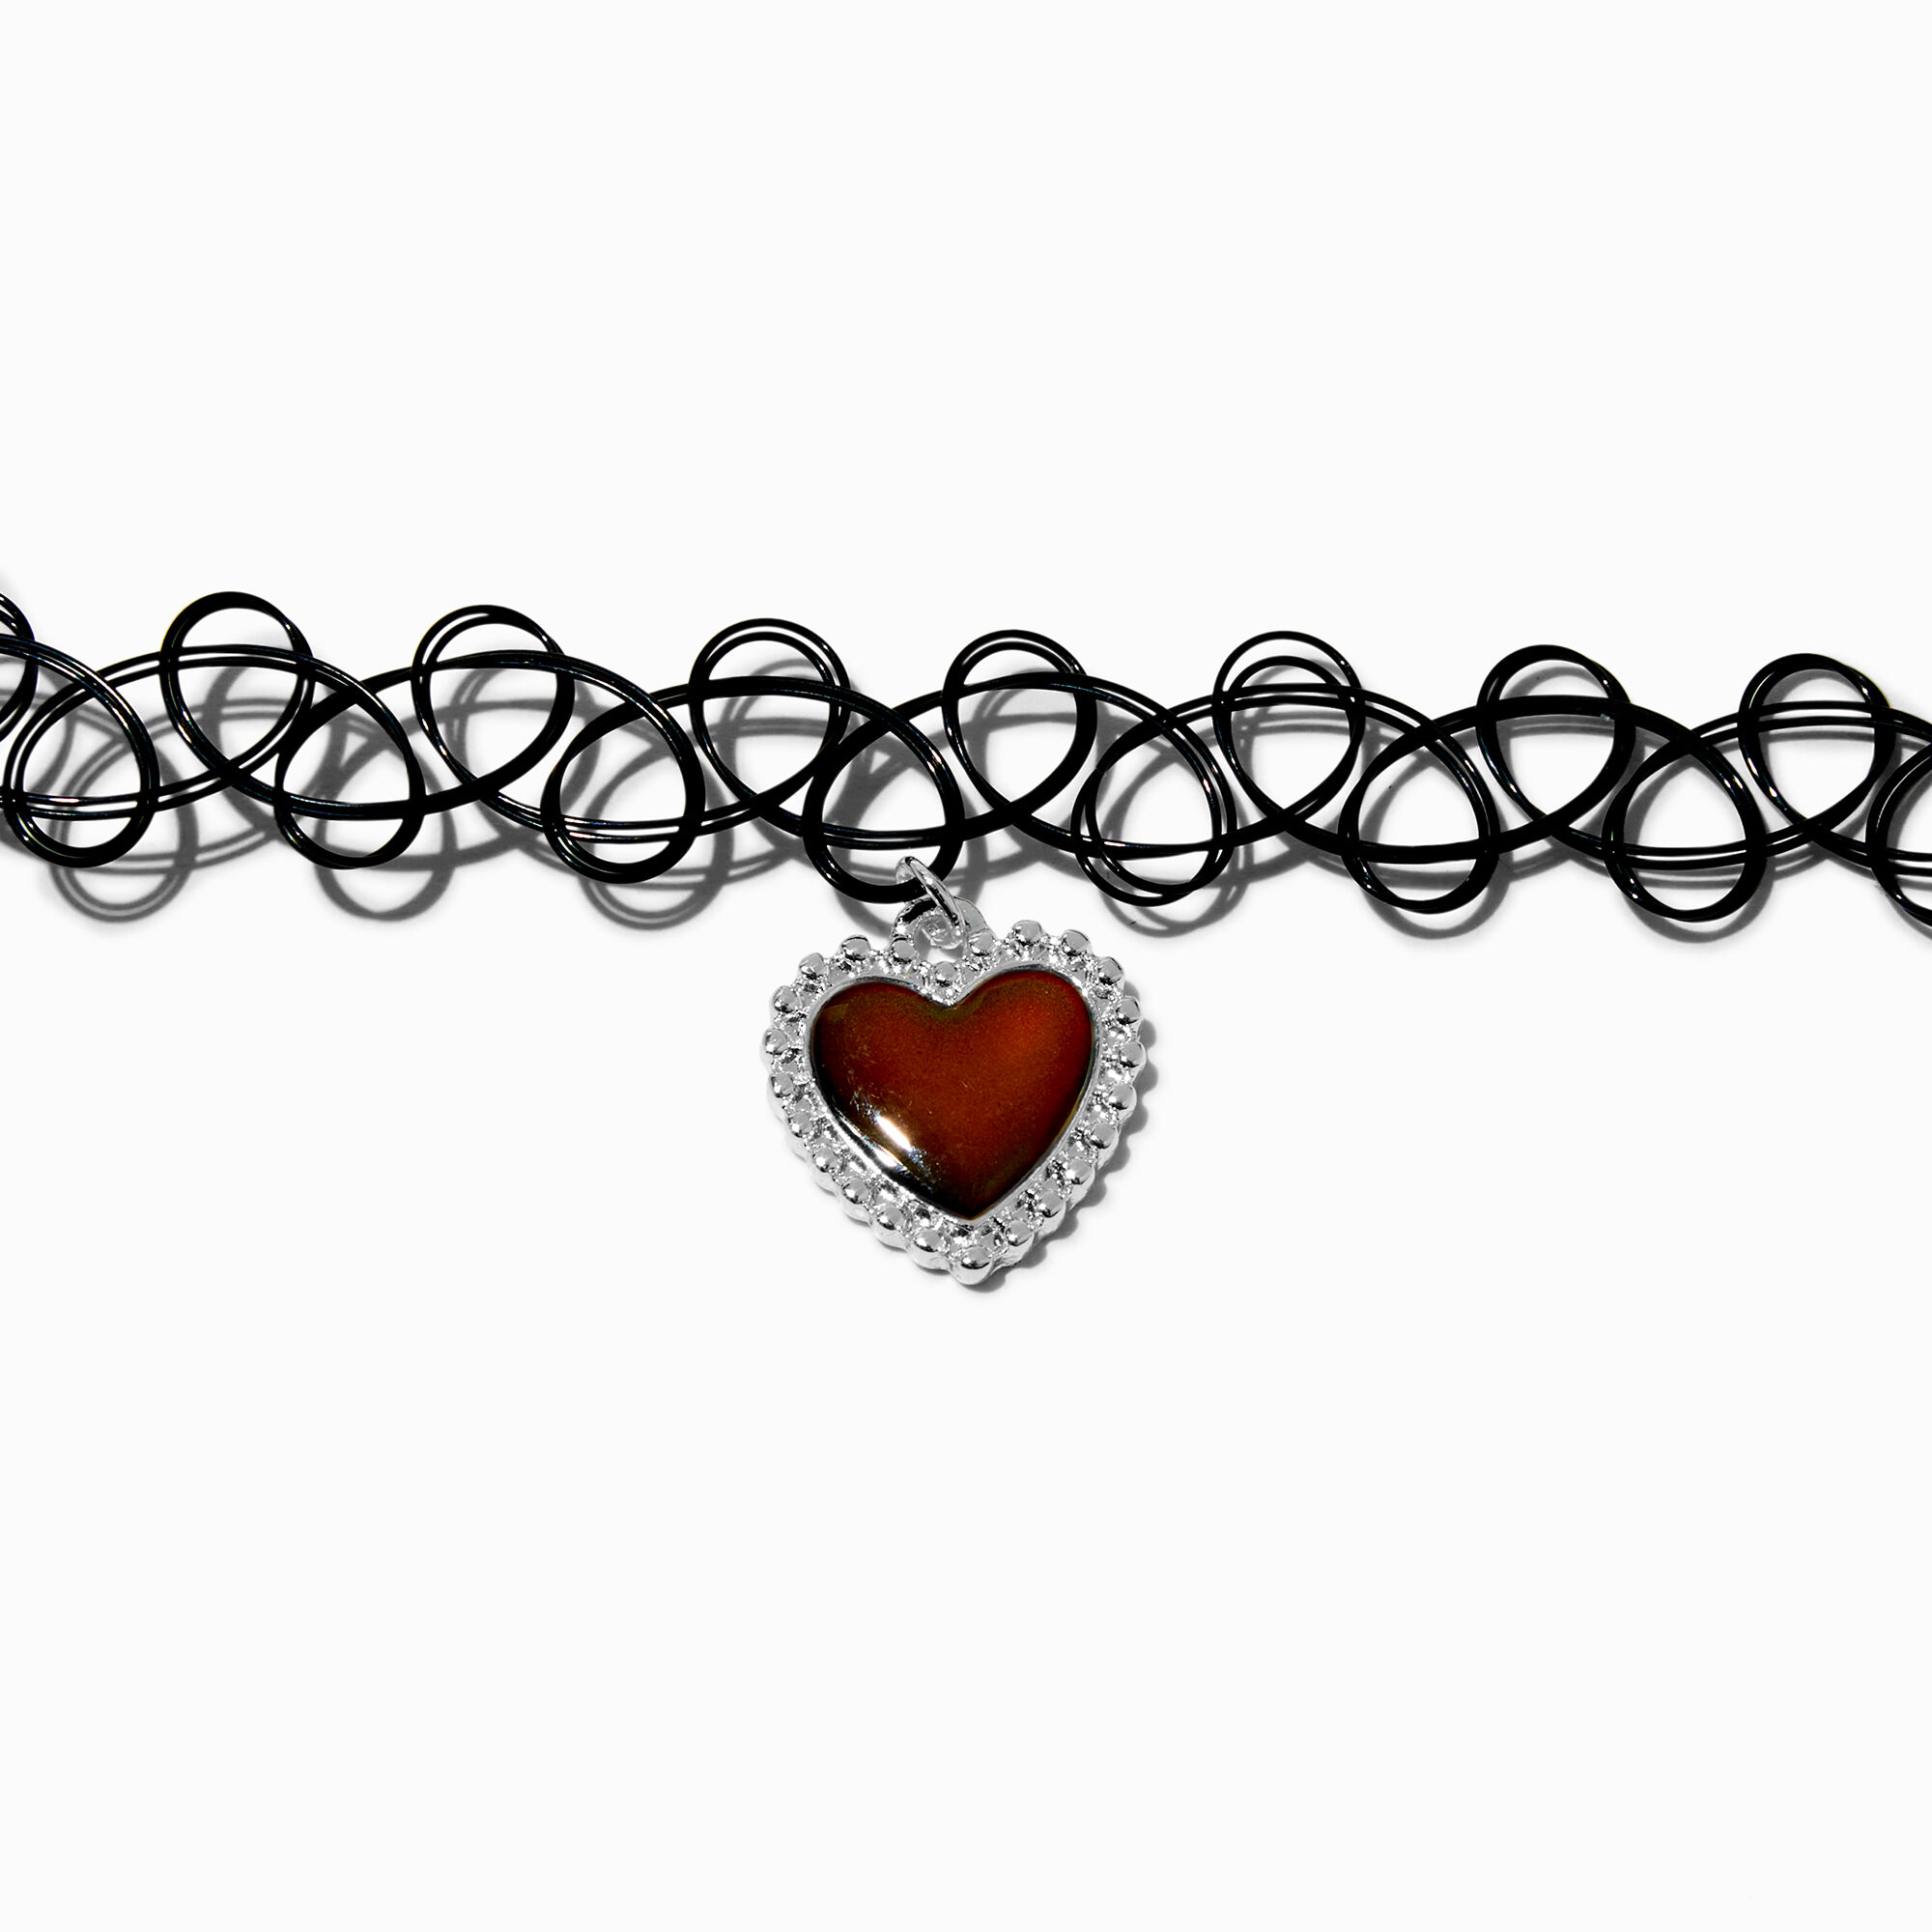 View Claires Heart Mood Pendant Tattoo Choker Necklace Silver information